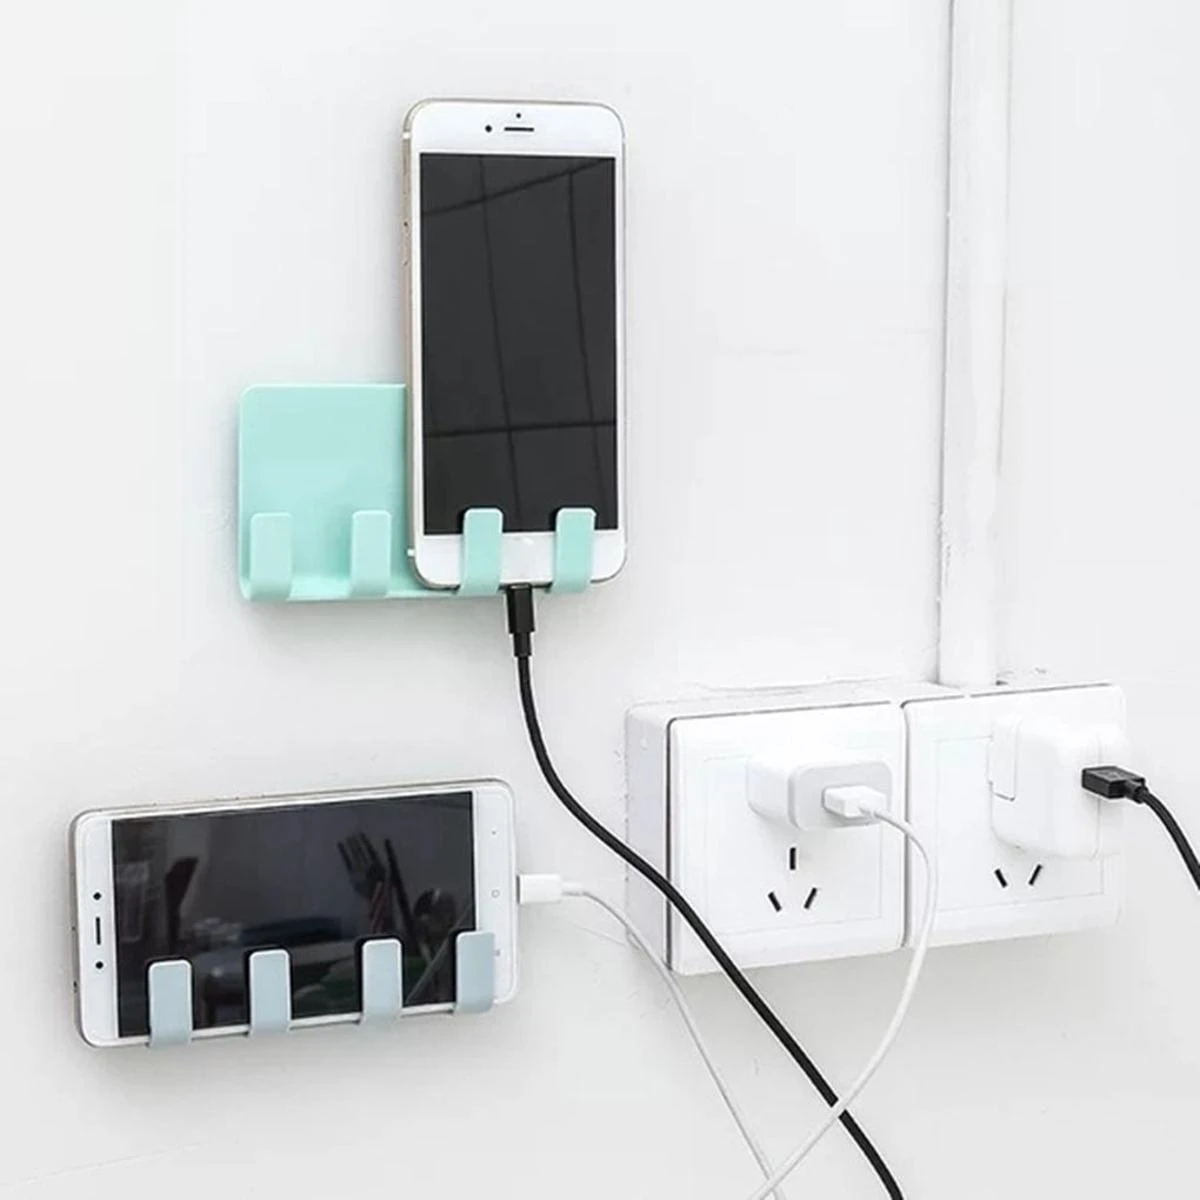 Mobile Phone Holders Phone Charger Wall Mounted 4 Hooks Storage Hanger Rack Bathroom Hanging Holder Mobile charger stand walls